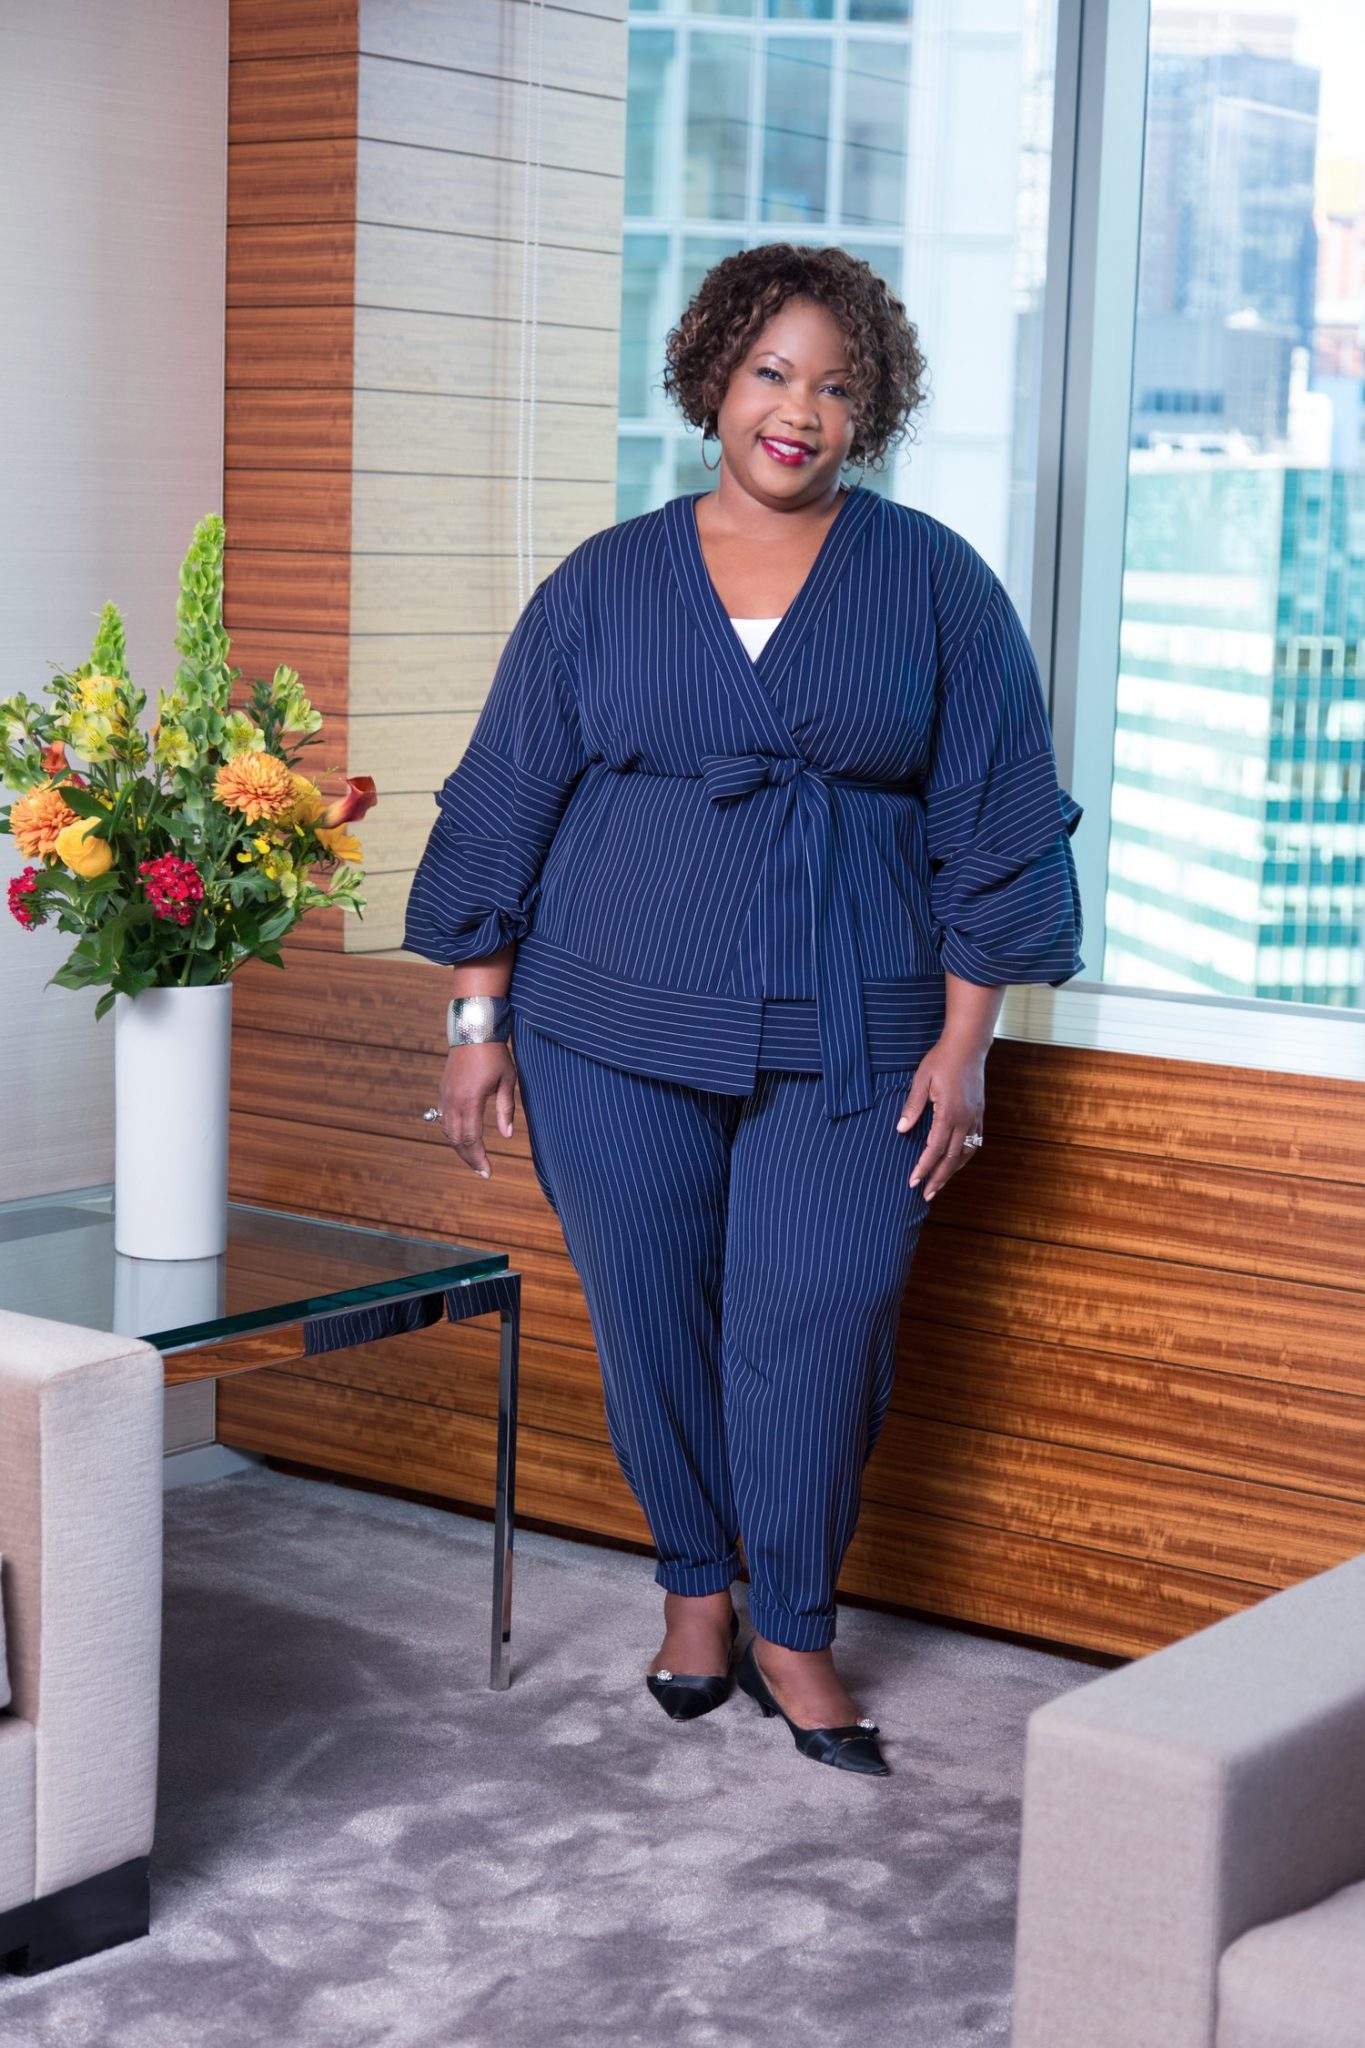 Plus Size Fashion for Women Over 40- Regina Speed-Bost in Eloquii Style & Substance Interview